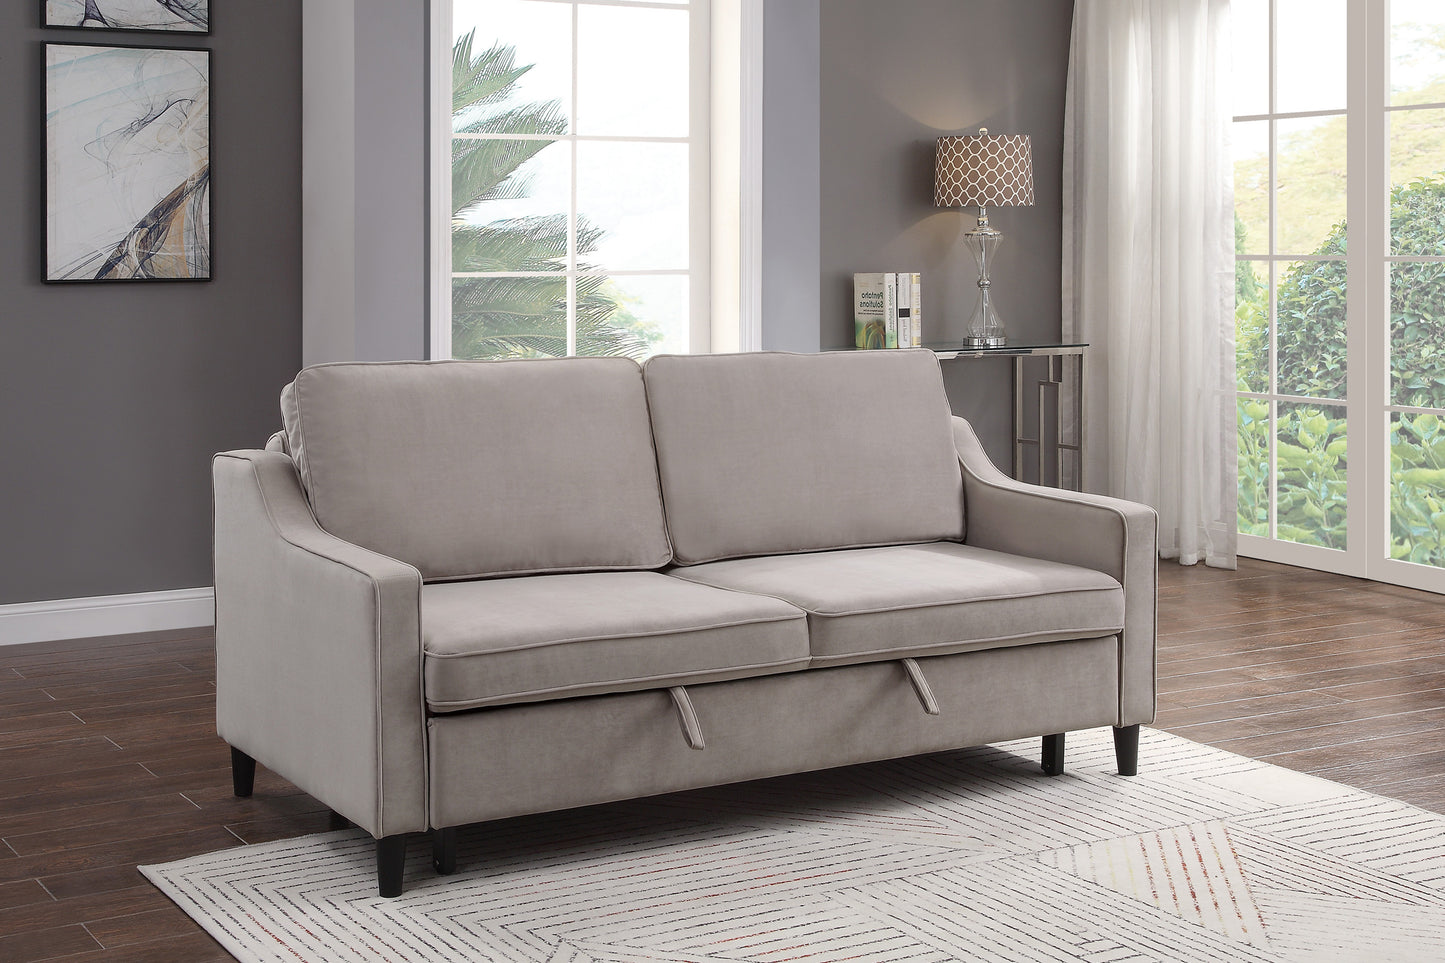 Adelia Convertible Studio Sofa with Pull-out Bed COBBLESTONE